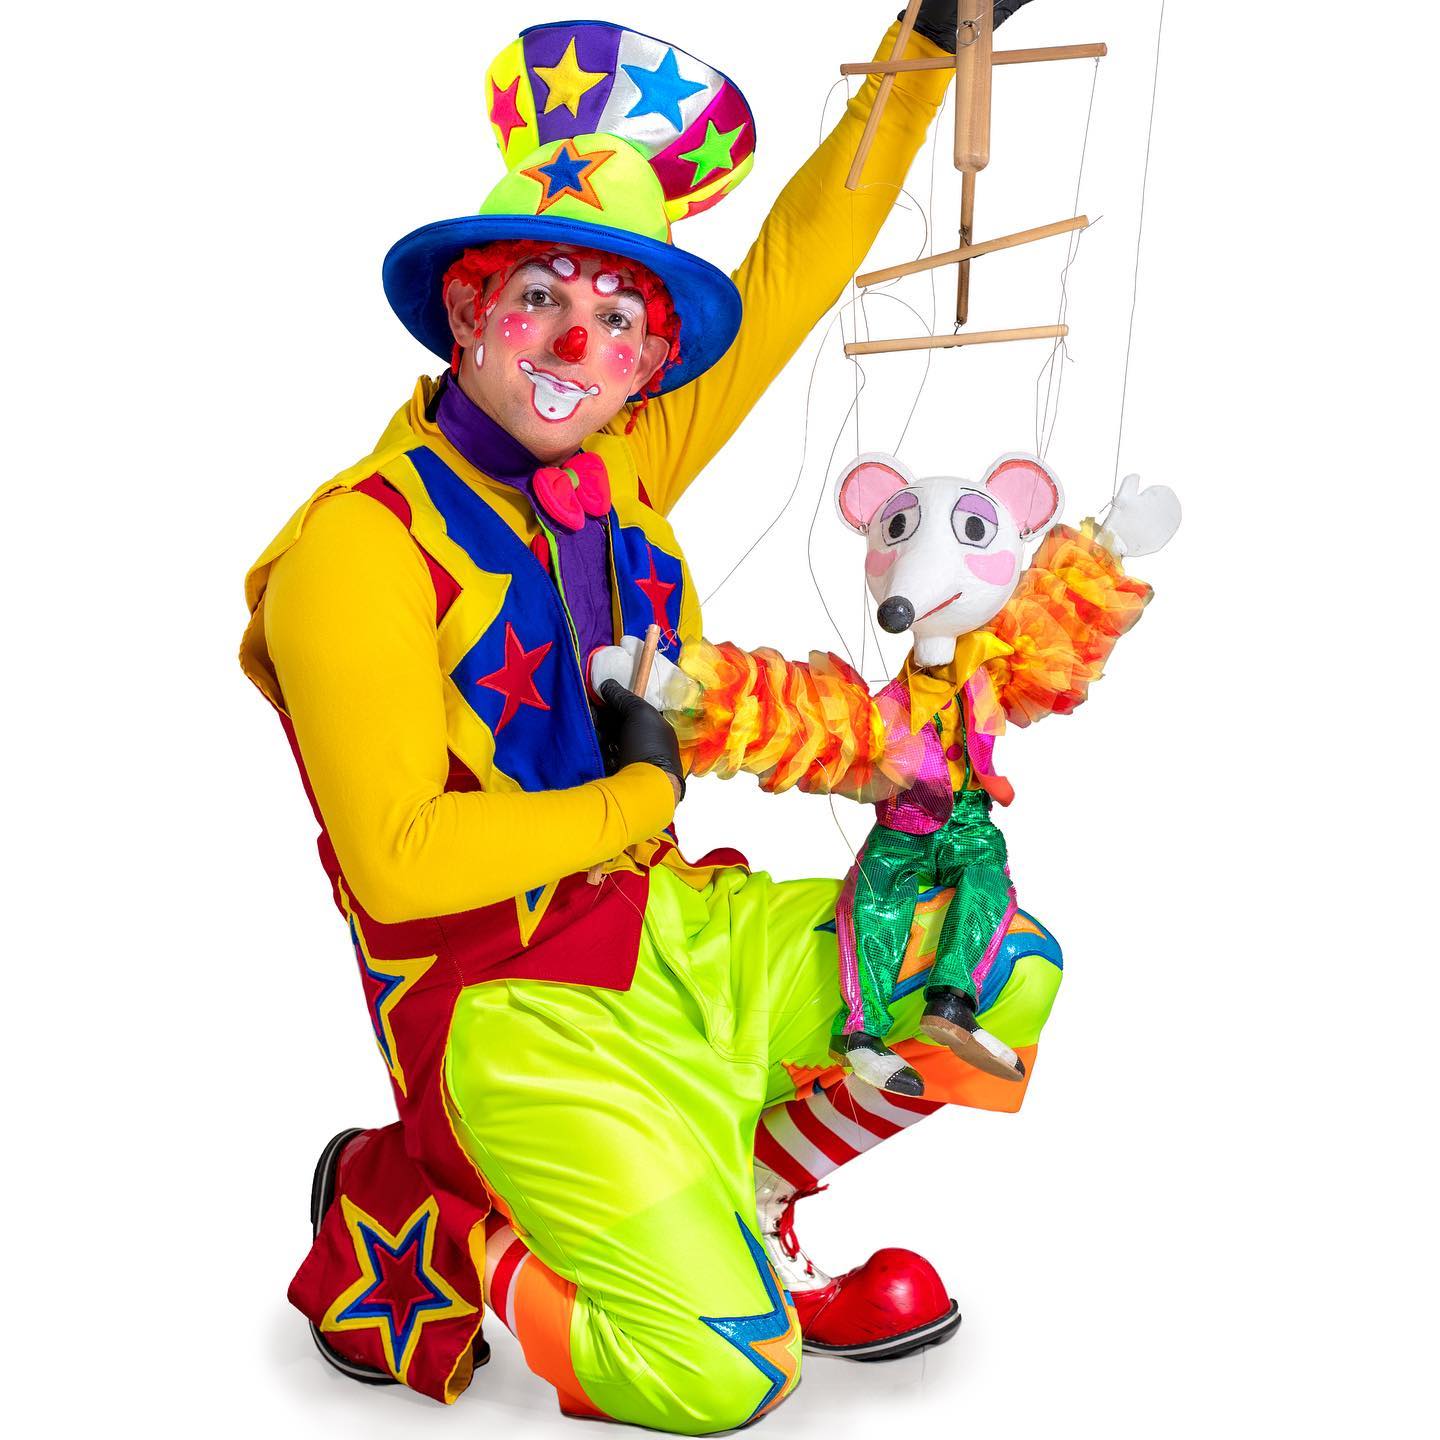 Payaso Adrepin is to provide family entertainment beginning at 11:30 a.m. including magic and puppet shows, games, dances and more. 